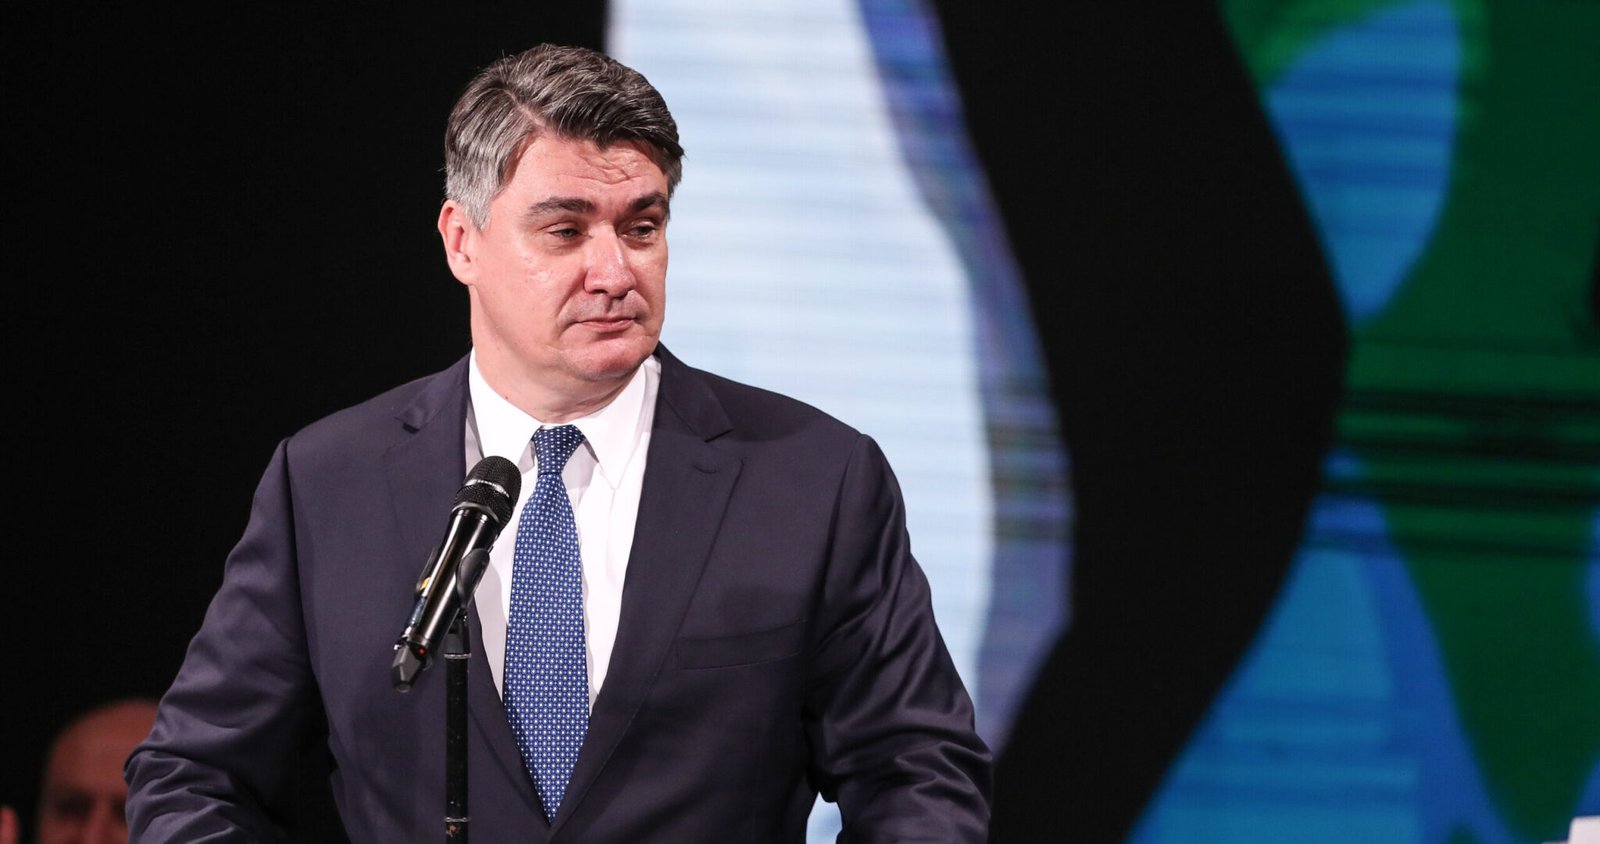 Croatian presidential candidate and former Prime Minister Zoran Milanovic